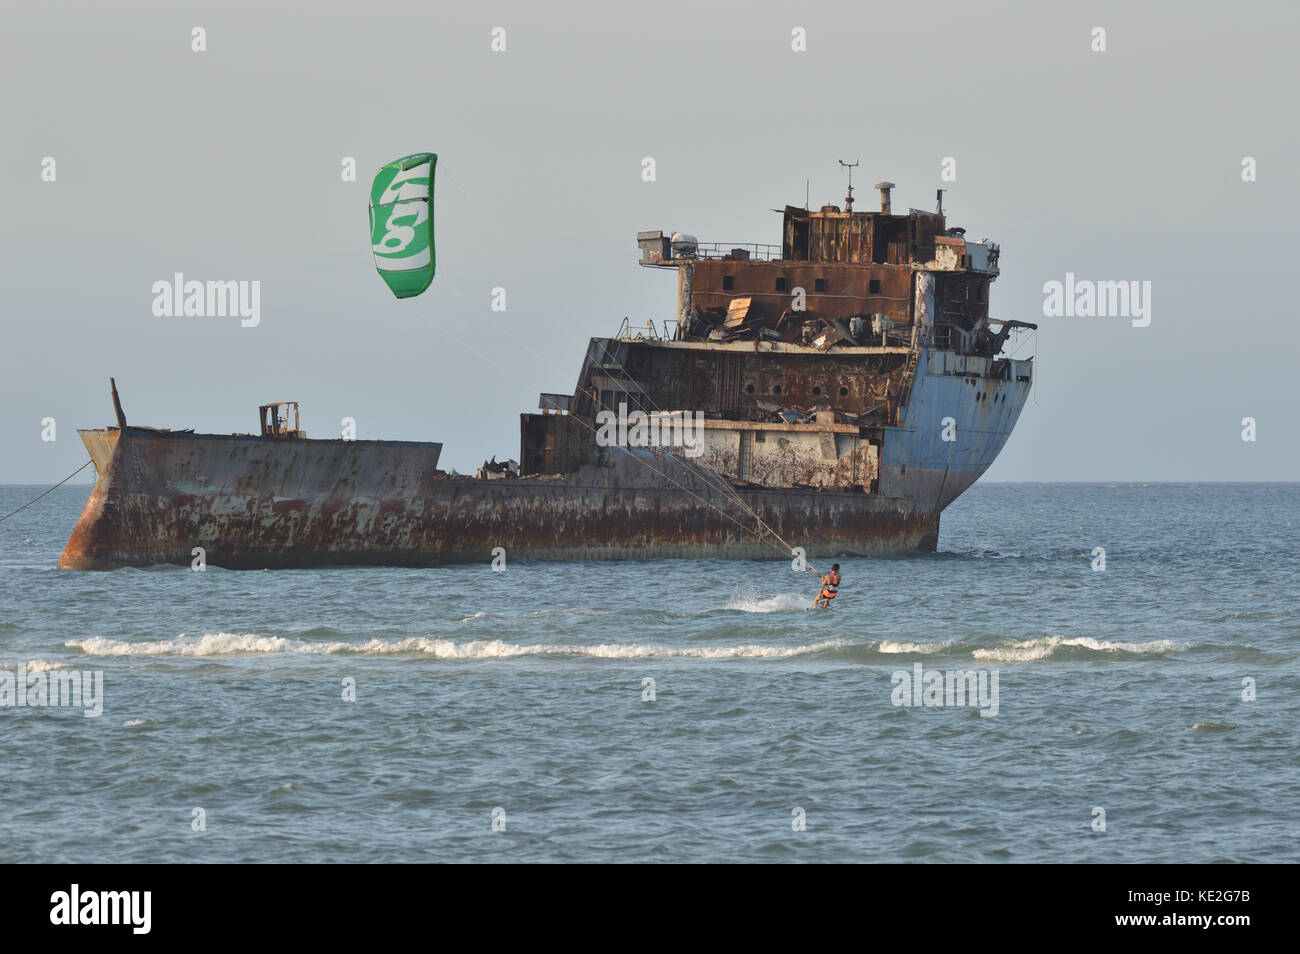 Female Kitesurfer in the sea with shipwreck in background in front of Kunduchi Beach Hotel north of Dar es Salem Tanzania Stock Photo